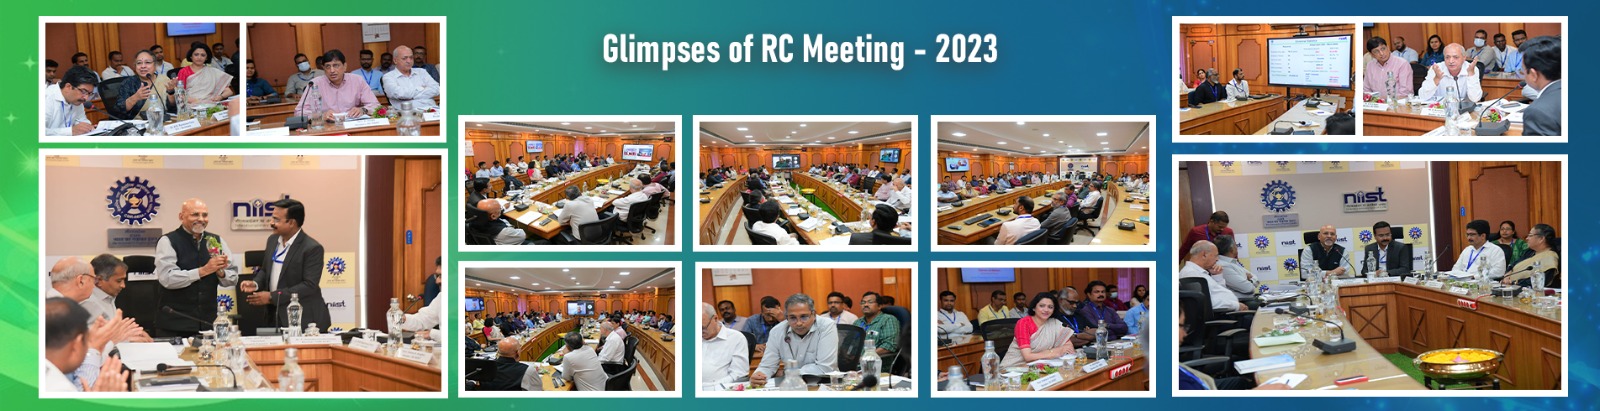 Banner - RC Meeting 2023